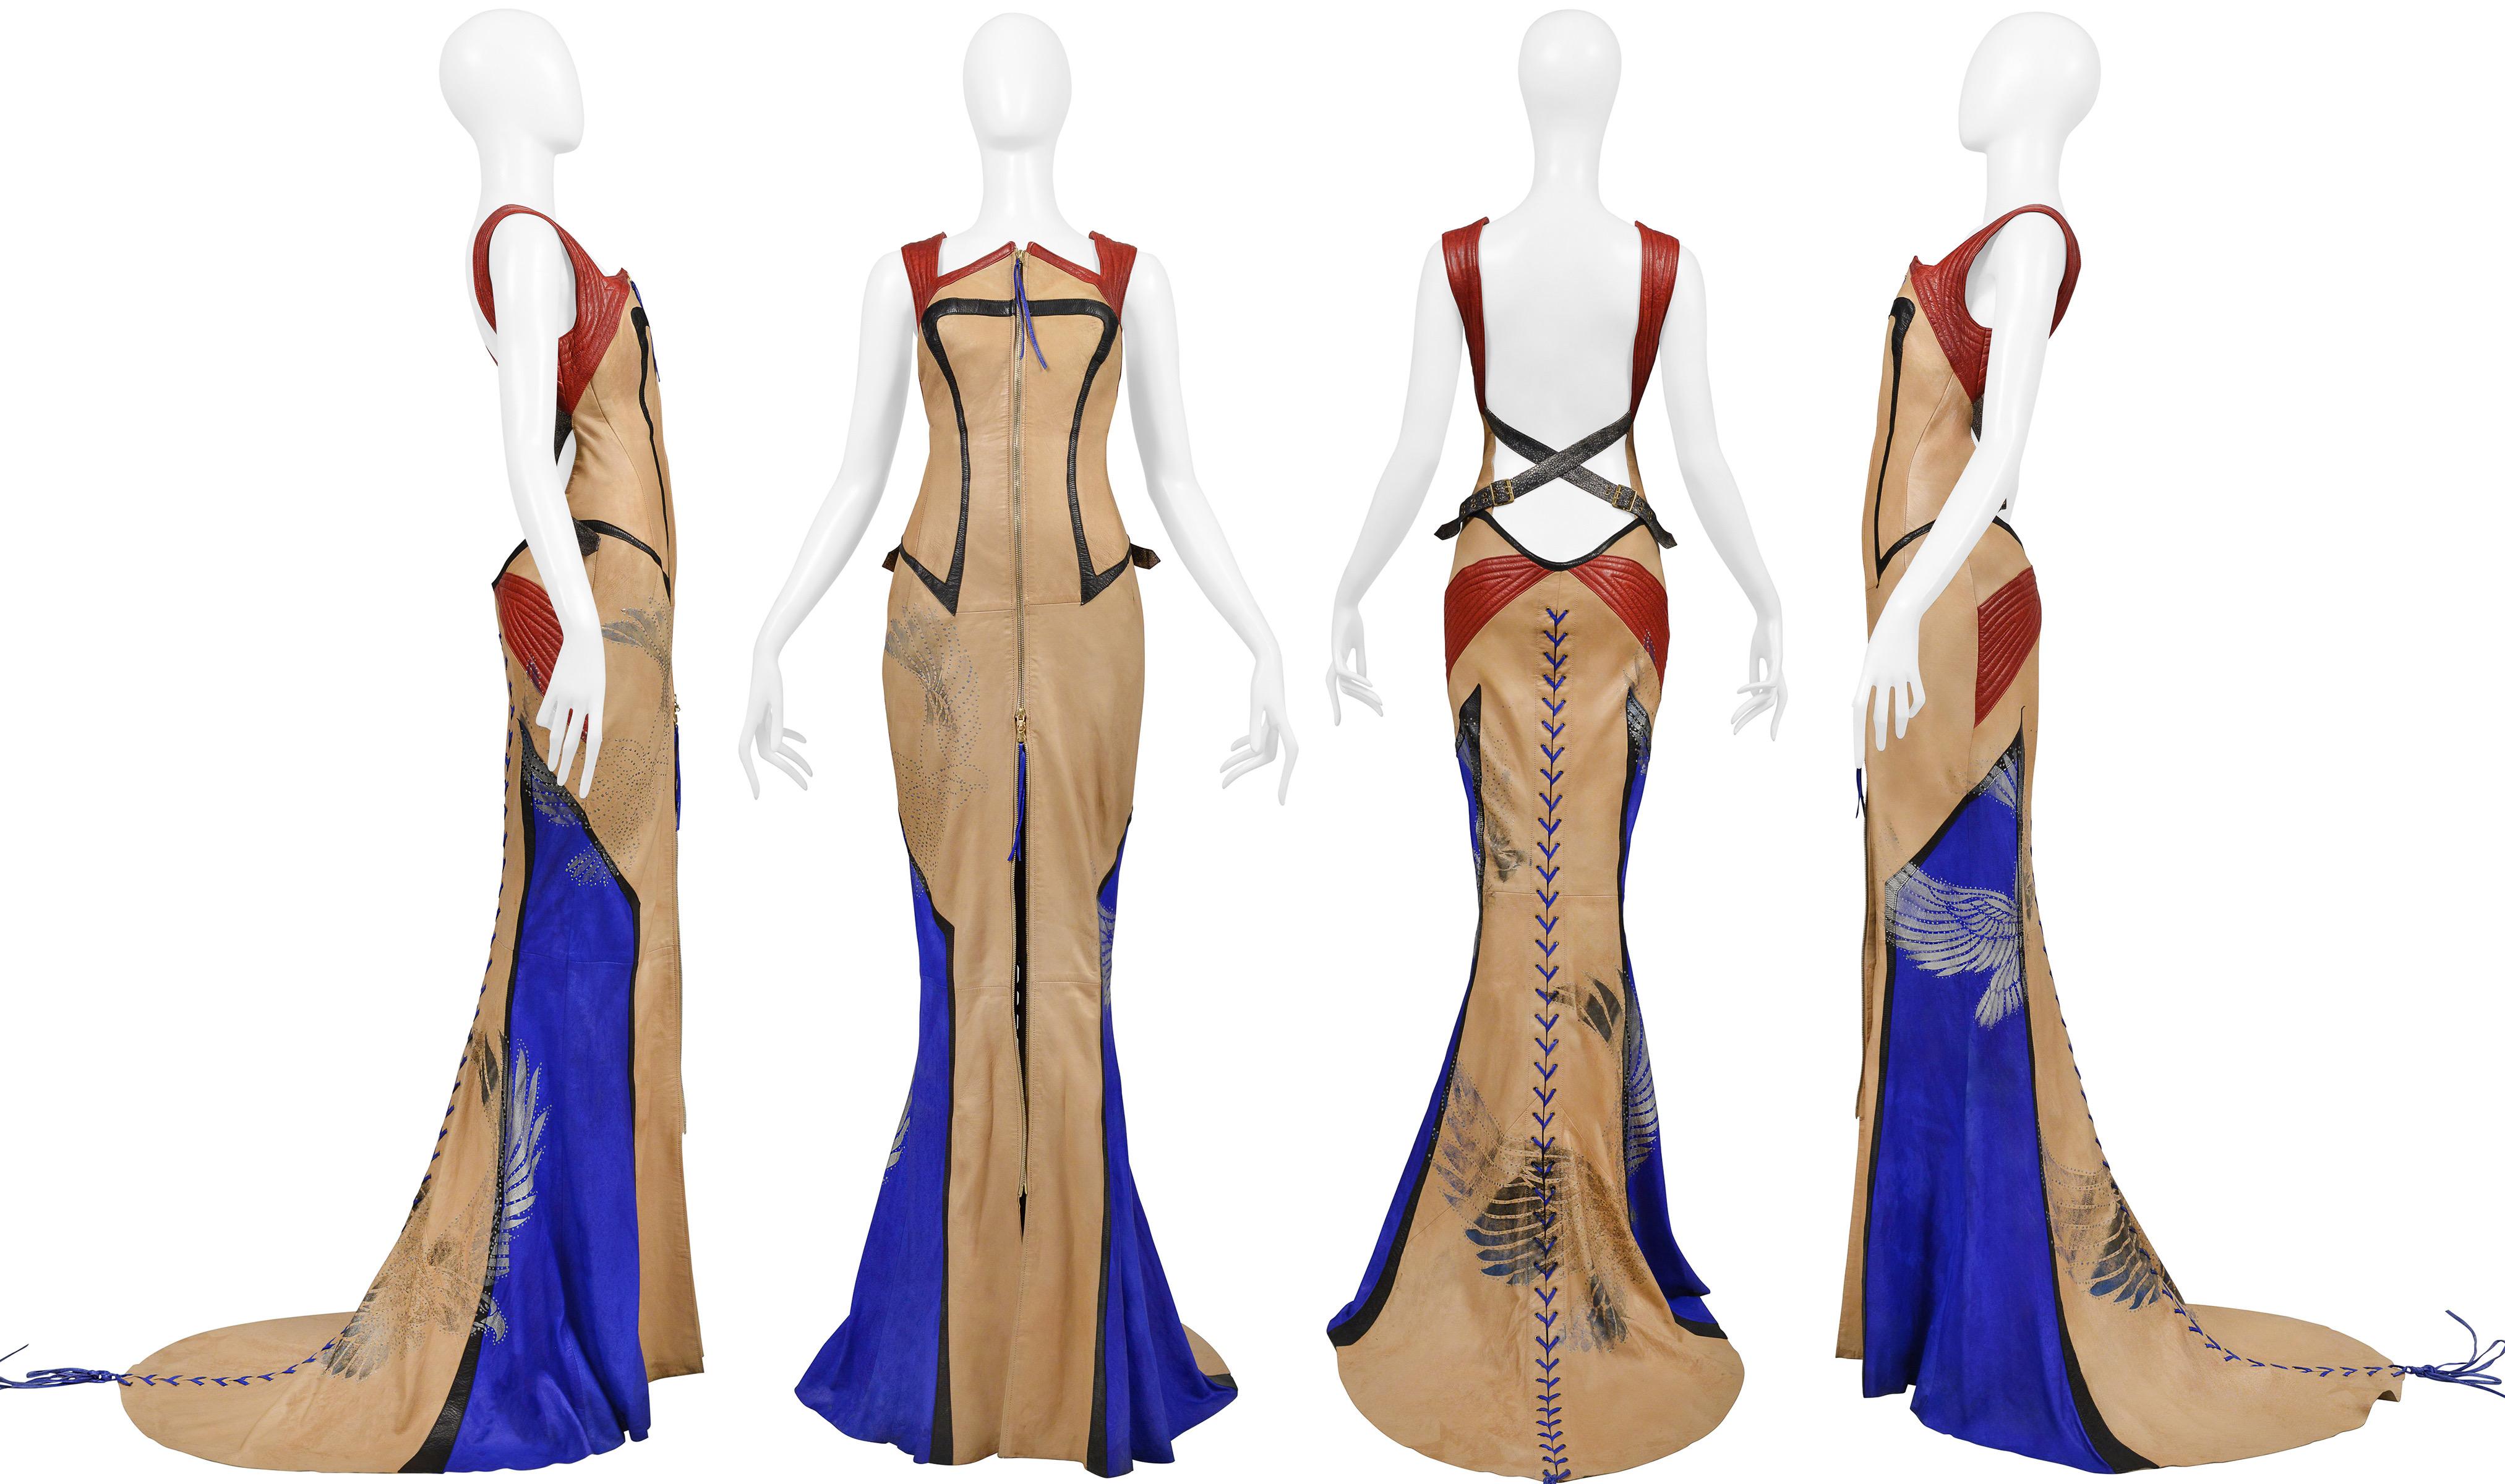 Resurrection Vintage is thrilled to showcase an exquisite vintage evening gown from Roberto Cavalli's 2003 collection. The gown features stunning red leather quilted straps and hip details, adorned with hand-painted eagles and symbols. The black